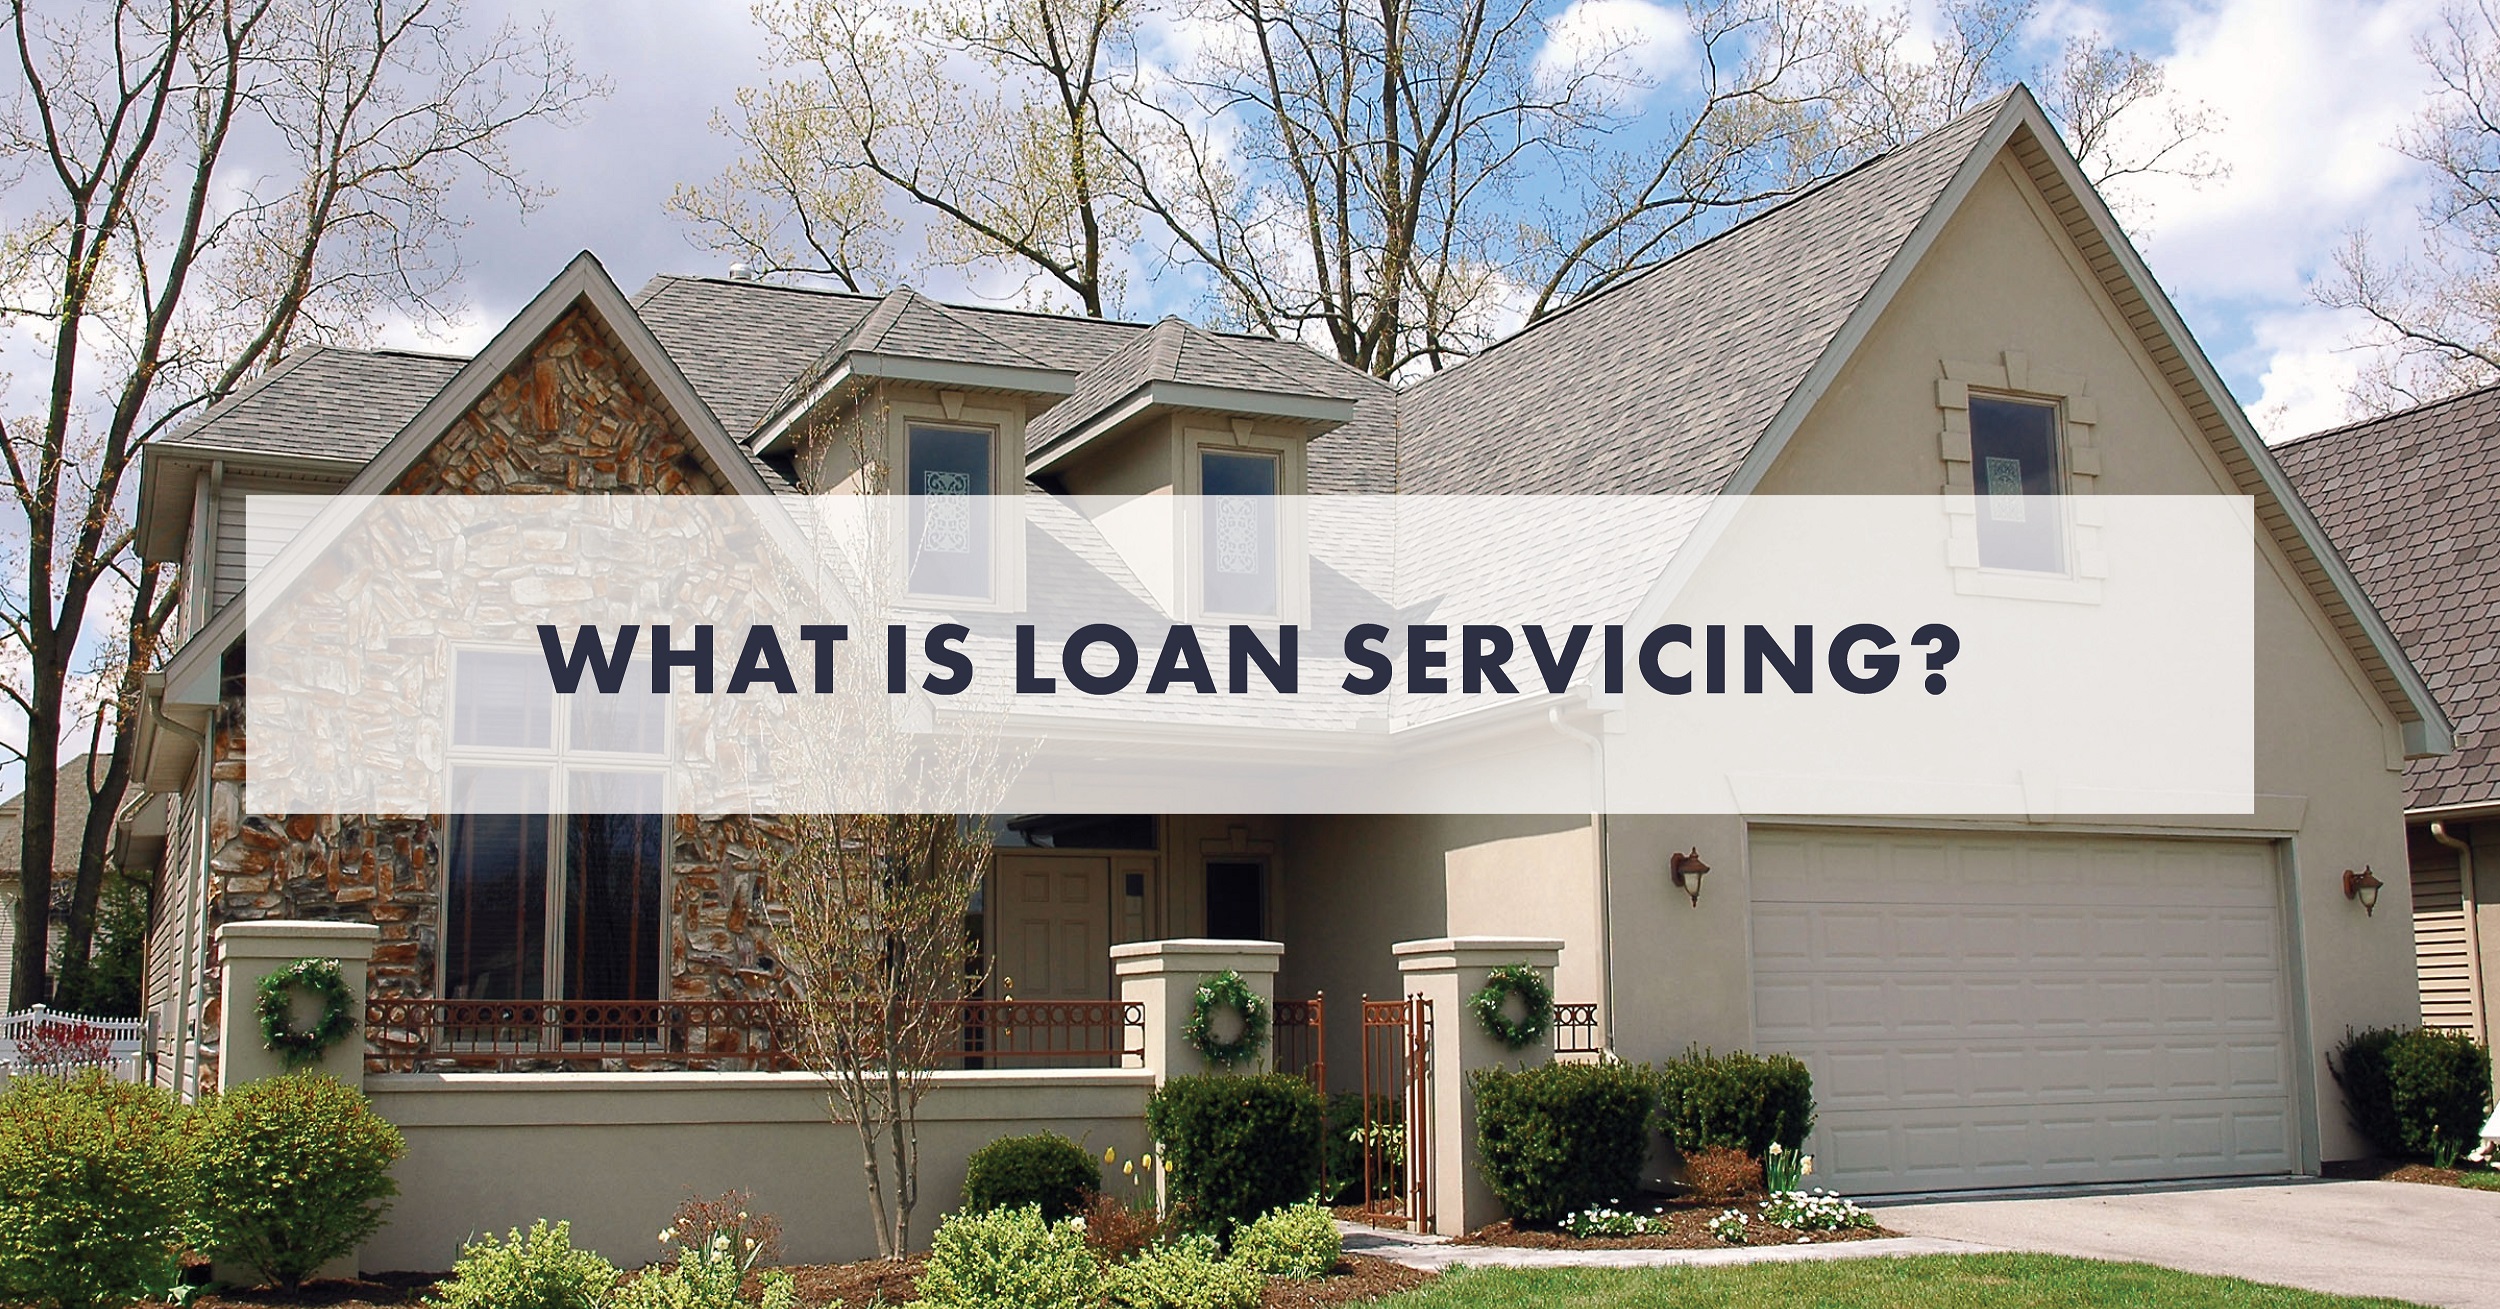 What is Loan Servicing